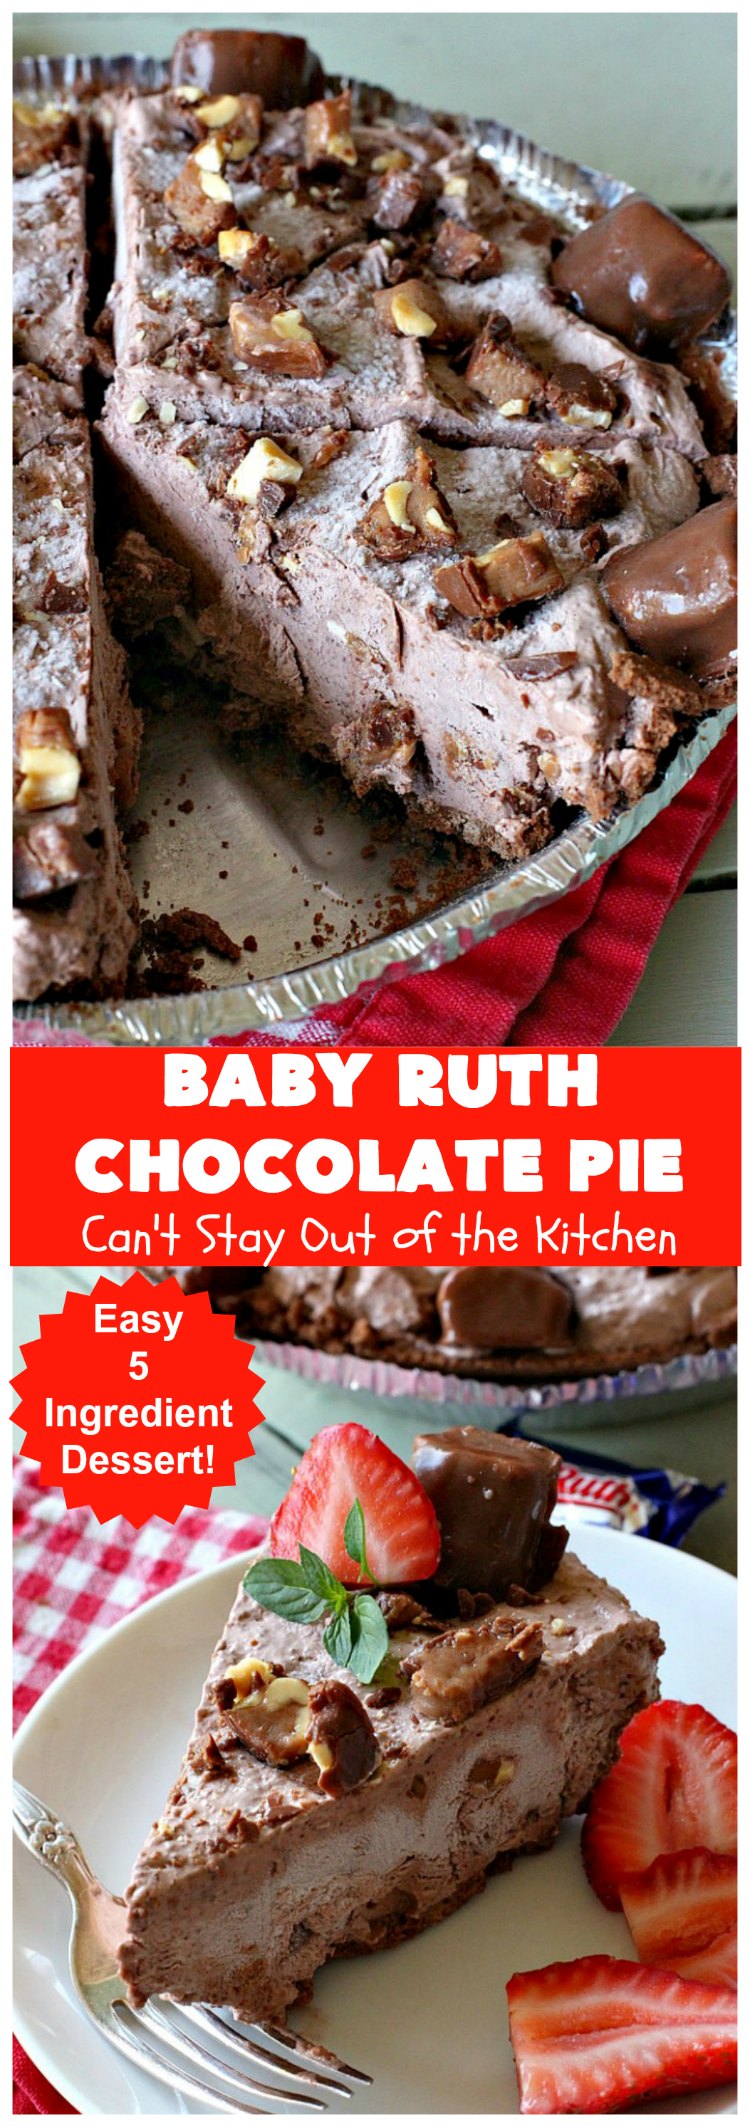 Baby Ruth Chocolate Pie | Can't Stay Out of the Kitchen | this outrageous #chocolate #pie made with #BabyRuthCandyBars so it's chocolaty & filled with #caramel. You'll swoon over every bite! #holiday #dessert #HolidayDessert #ChocolateDessert #BabyRuthChocolatePie